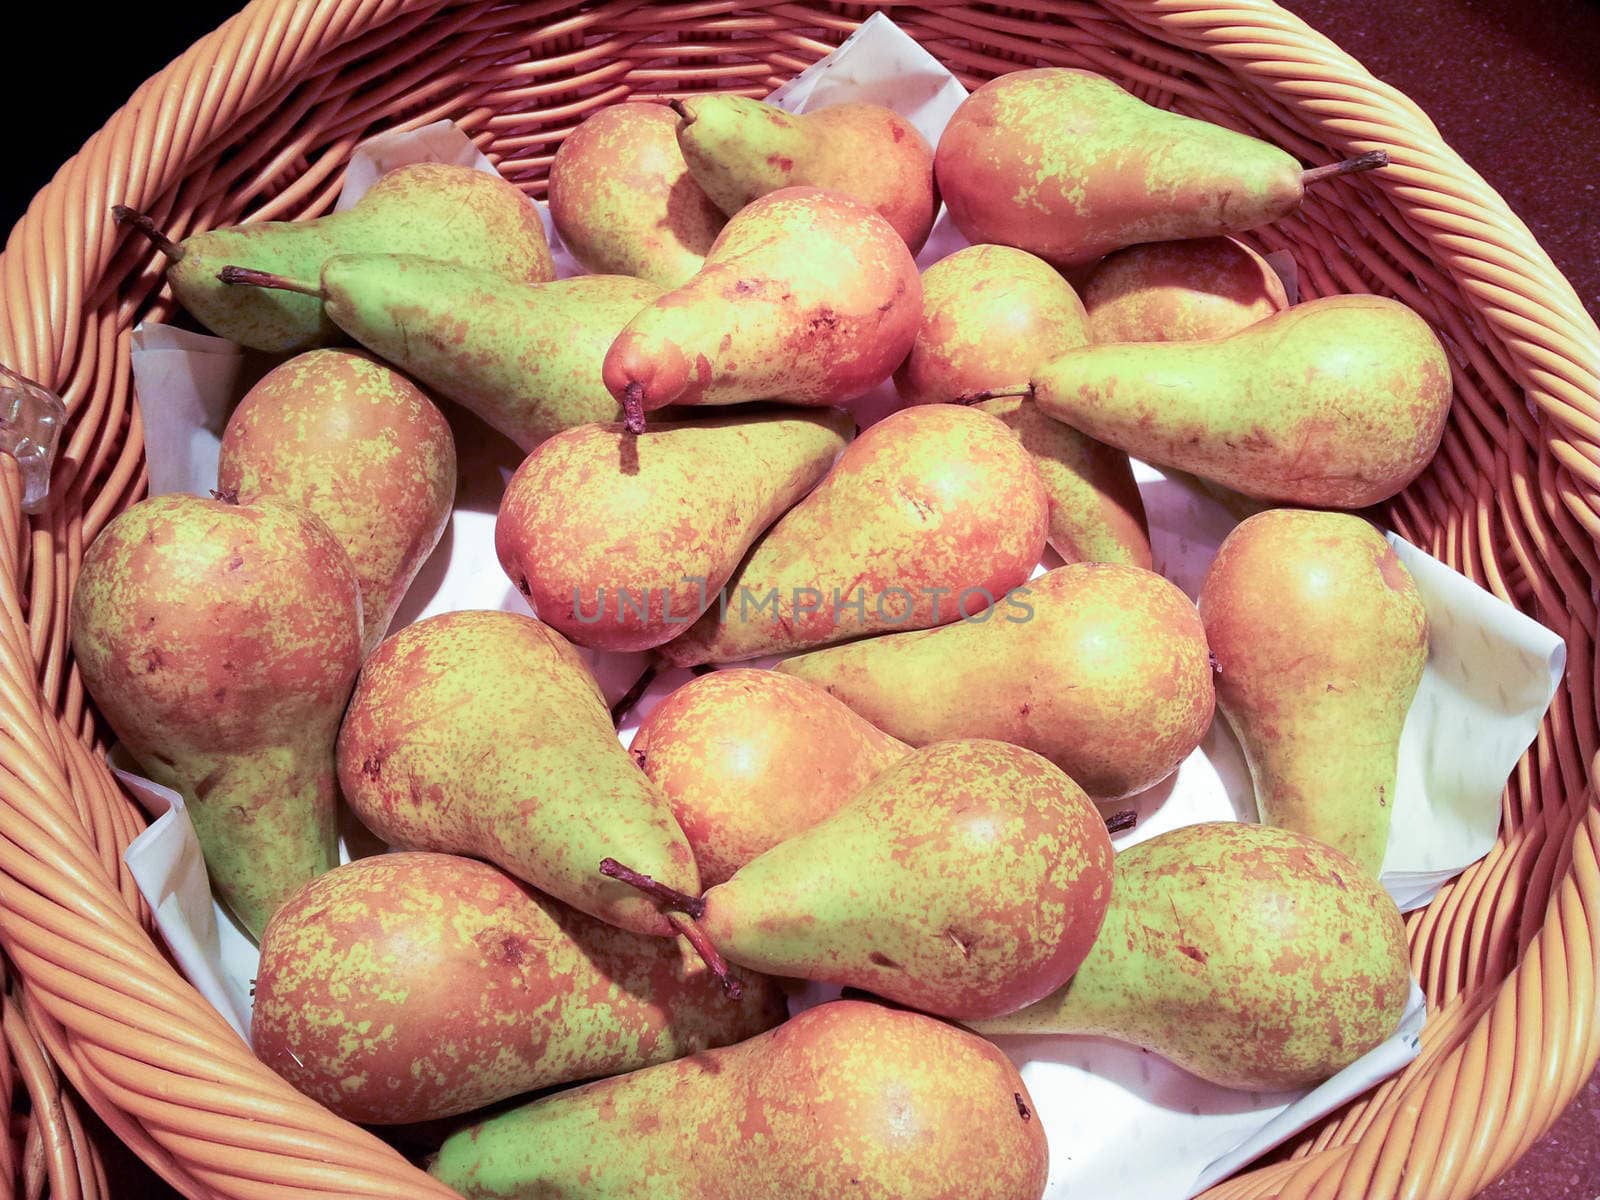 Pears collected in a basket at harvest